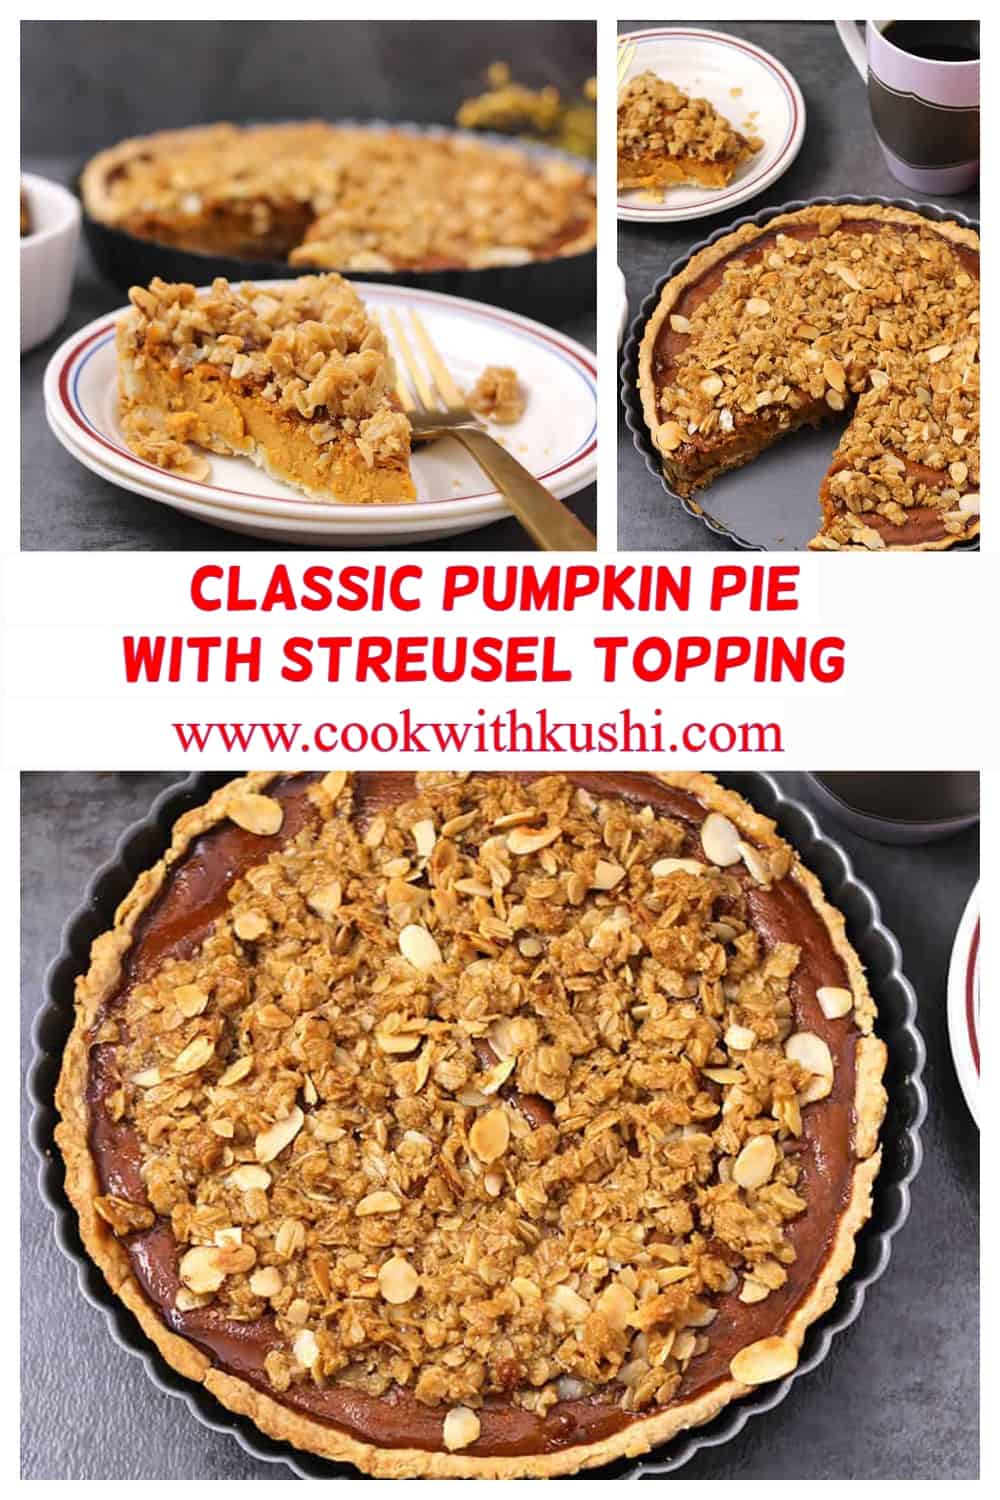 Classic pumpkin pie with streusel topping presented as a collage of pictures.